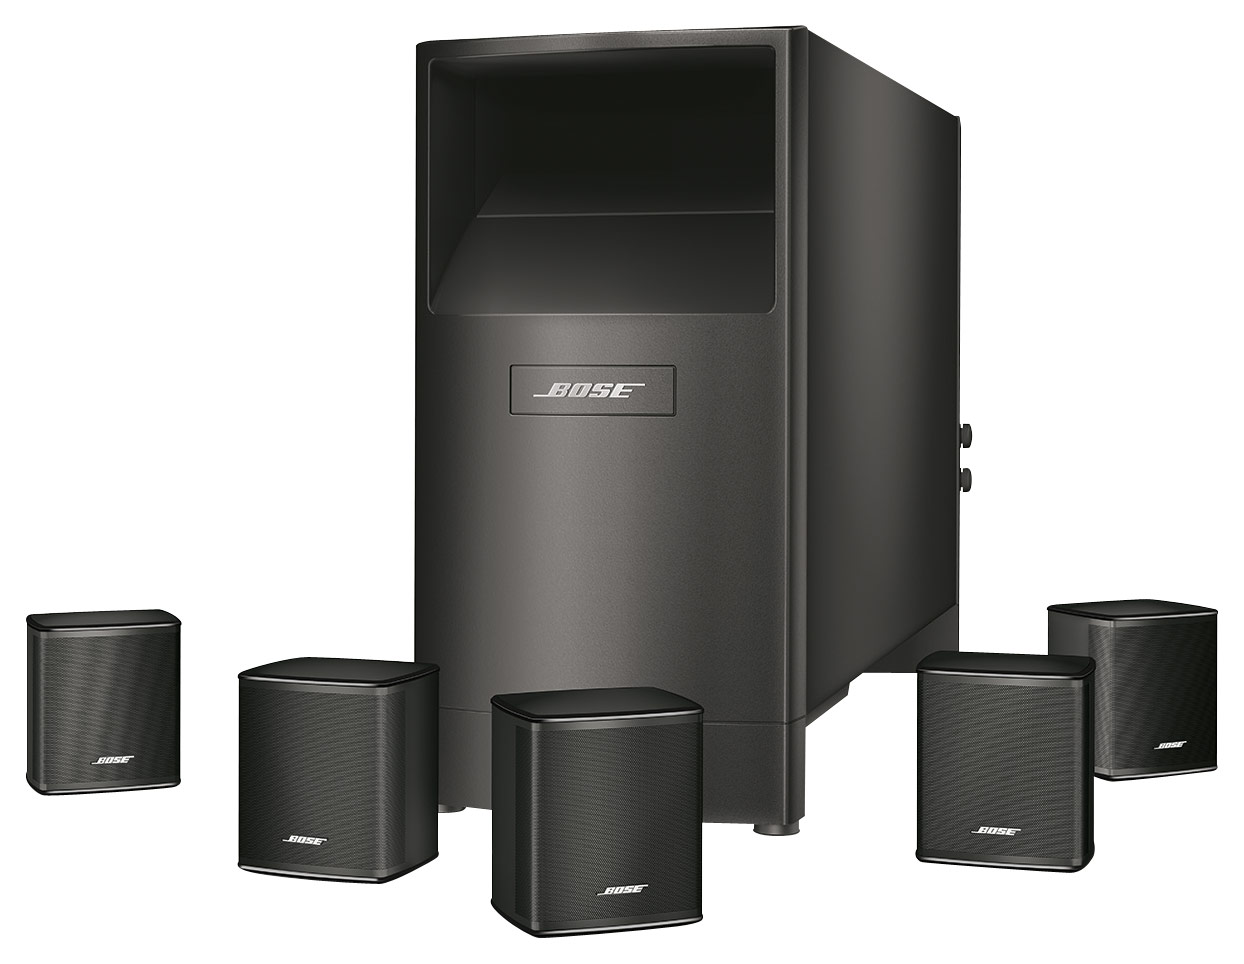  home theater speaker system deals